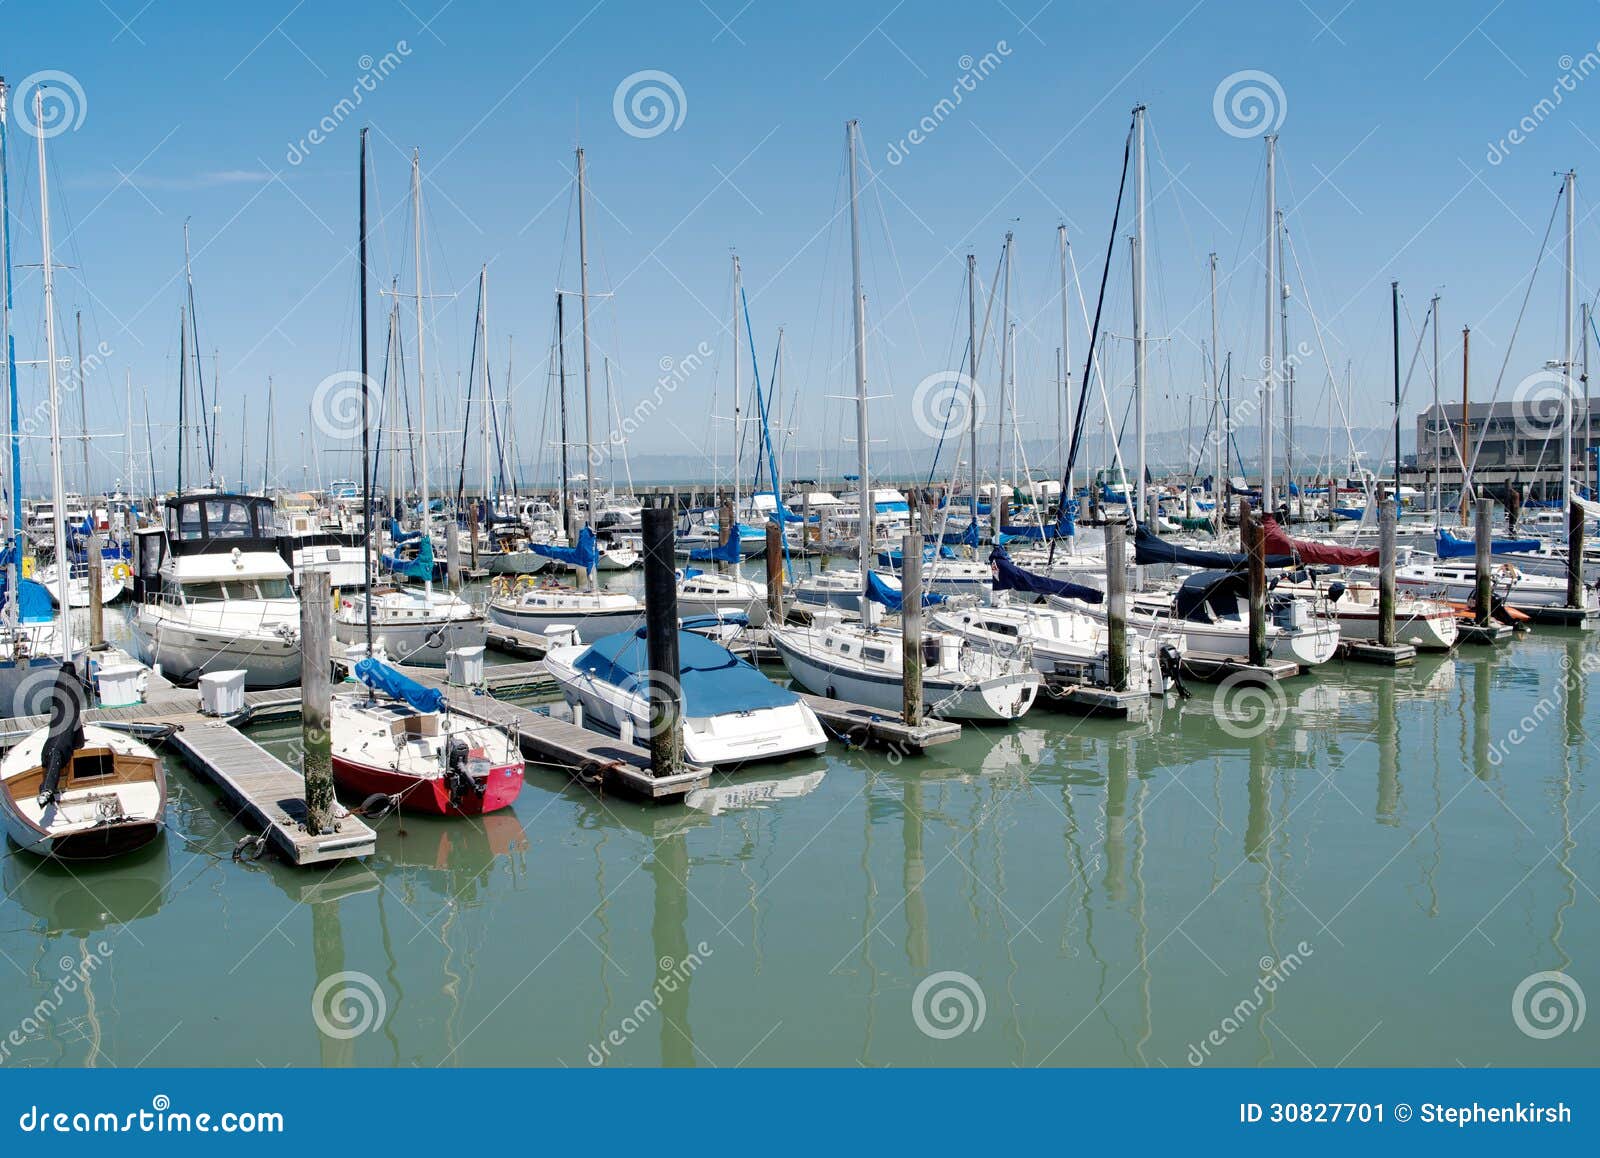 Multiple Rows of Boats Docked in San Francisco on a Sunny Day Stock ...